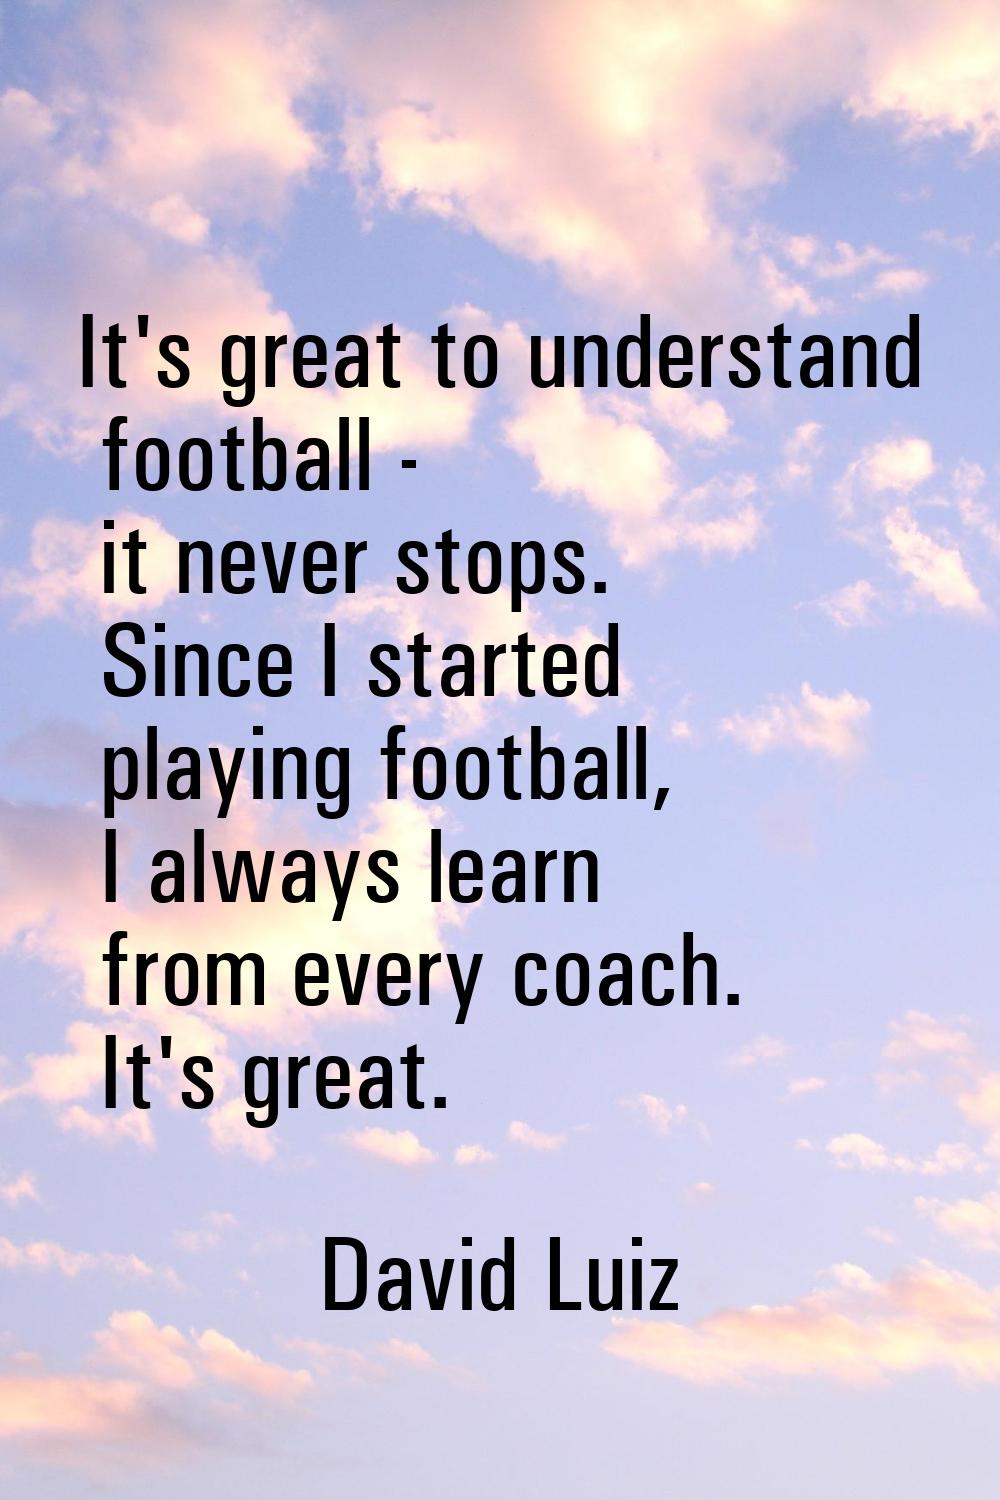 It's great to understand football - it never stops. Since I started playing football, I always lear